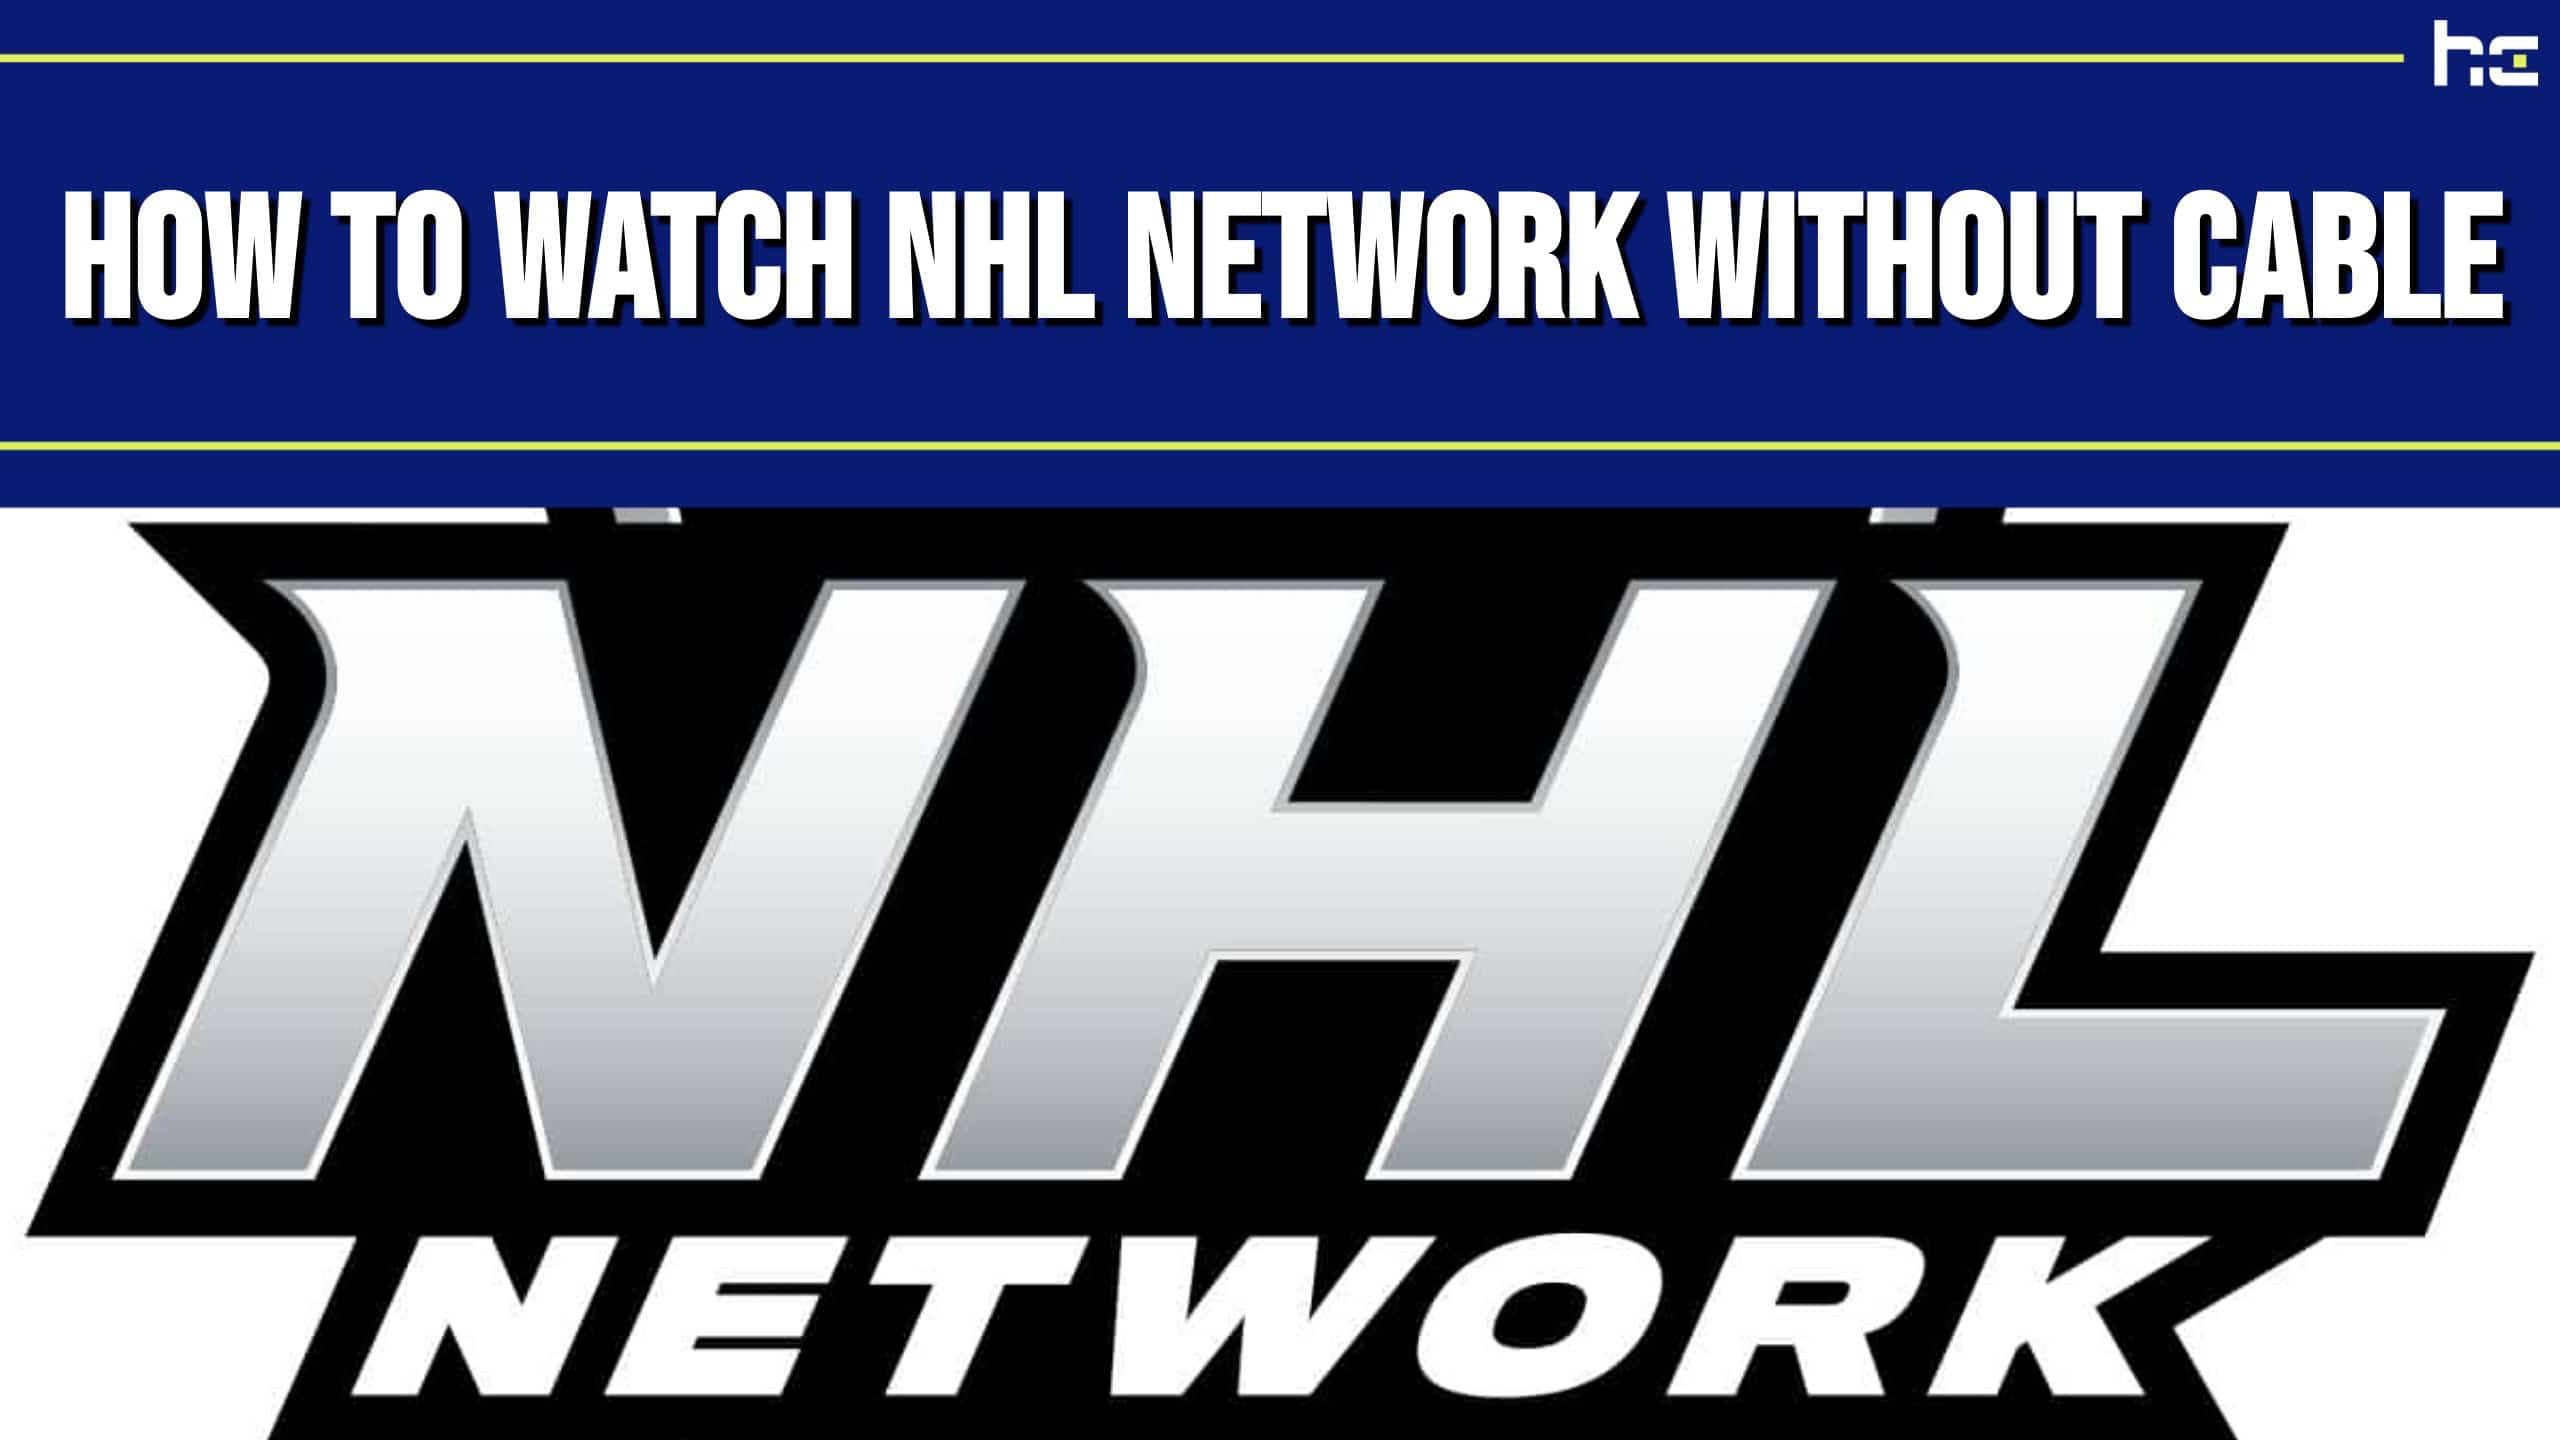 How to Watch NHL Network Without Cable infographic